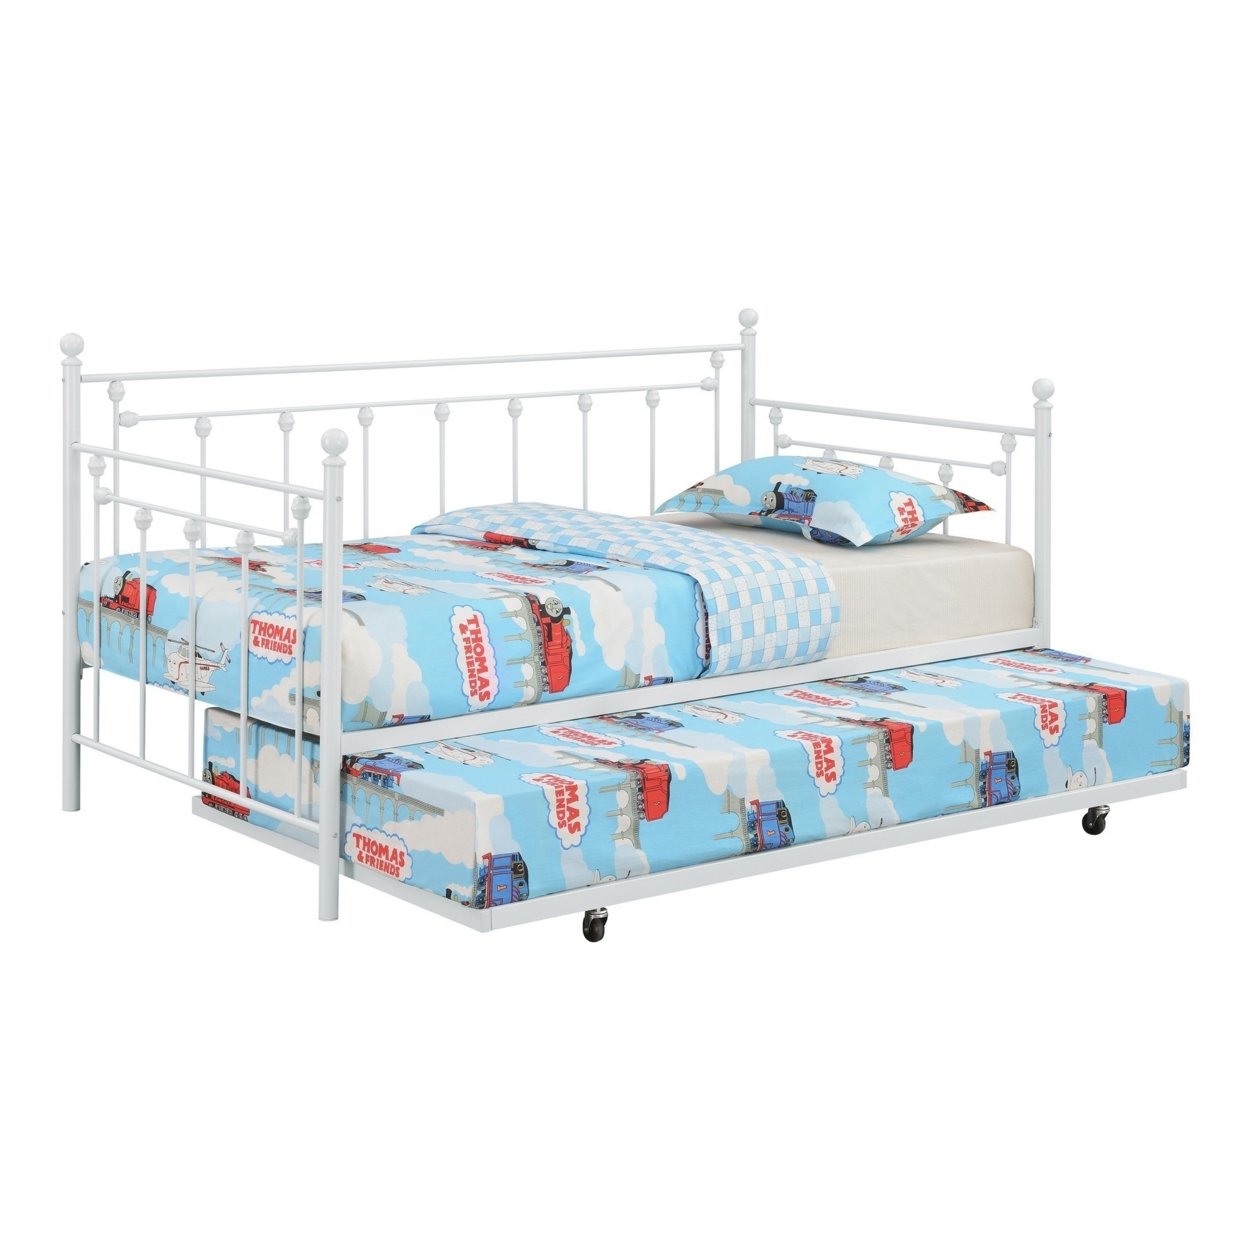 Olly Modern Daybed, Heavy Steel Metal Frame, Pull Out Trundle Bed, White